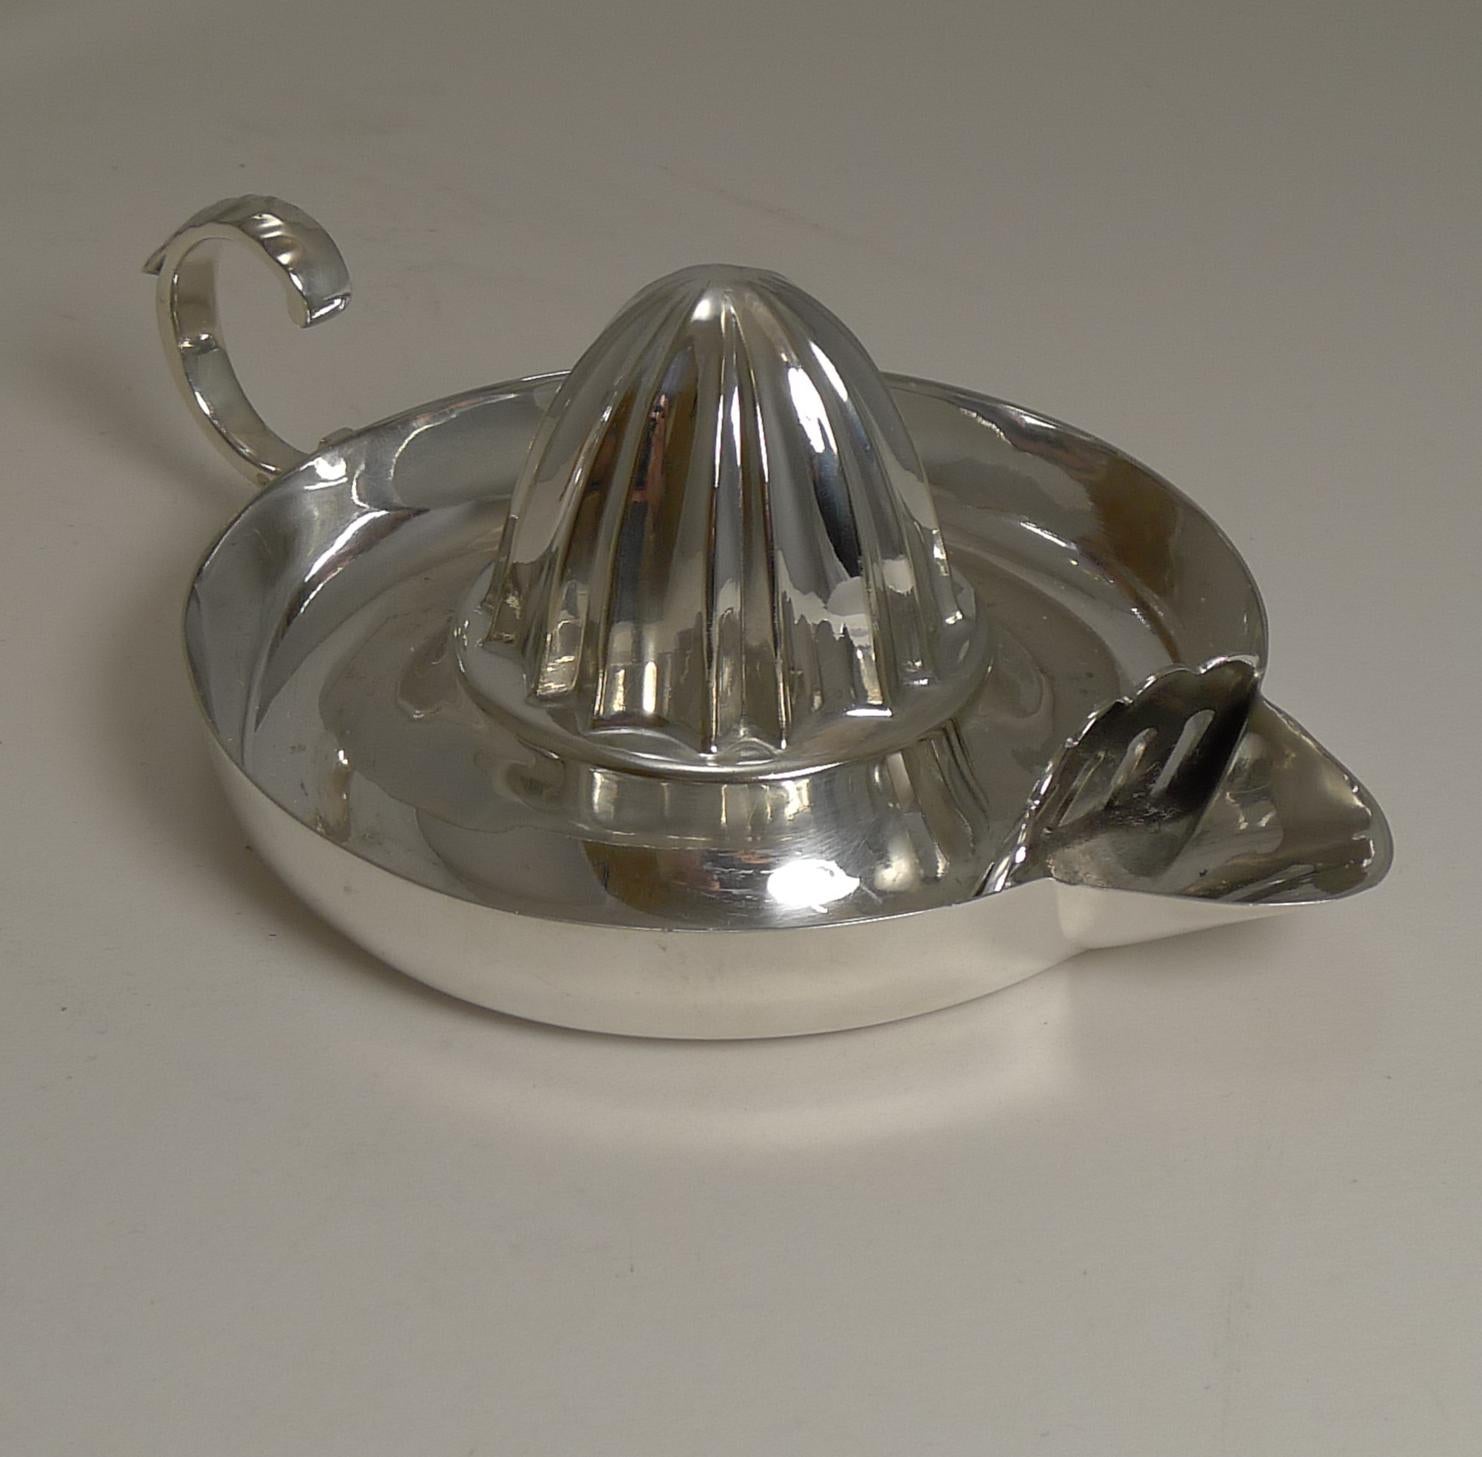 A fabulous antique lemon squeezer, perfect for the bar or cocktail cart / trolley, a great and hard to find addition to your barware collection.

Made from English silver plate marked on the underside (EPNS) for Electro_plated nickel silver, the